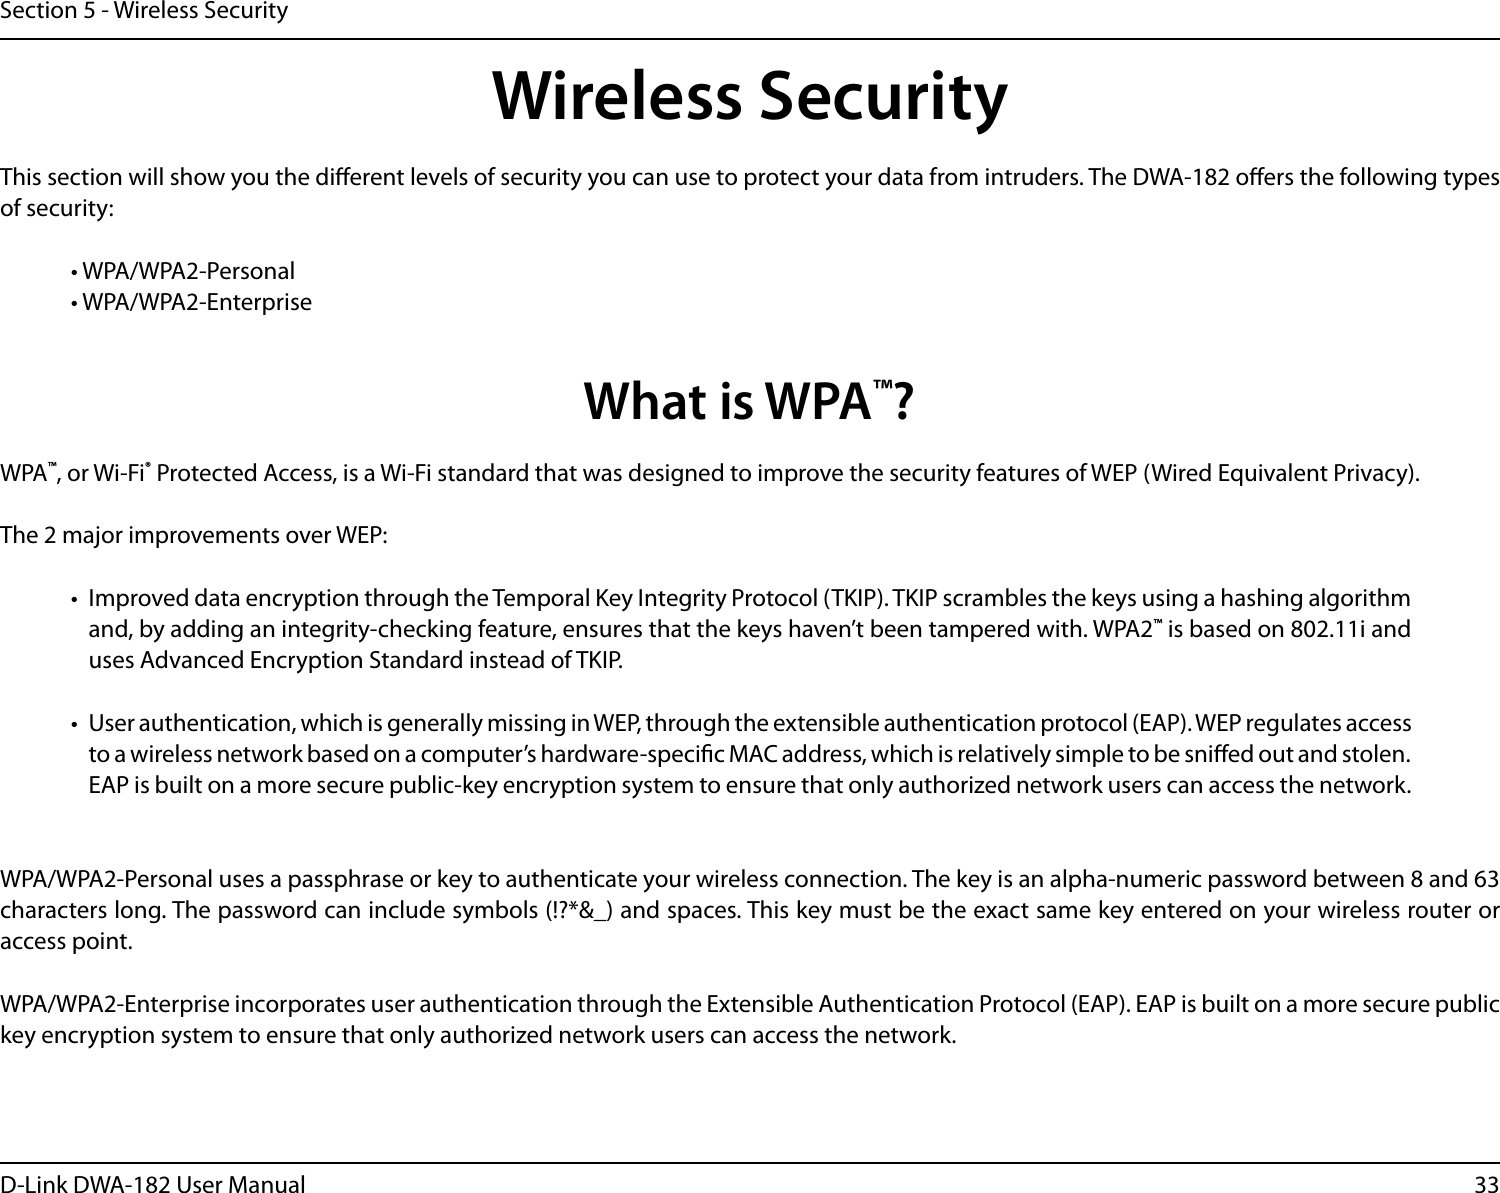 33D-Link DWA-182 User ManualSection 5 - Wireless SecurityWireless SecurityThis section will show you the dierent levels of security you can use to protect your data from intruders. The DWA-182 oers the following types of security:• WPA/WPA2-Personal    • WPA/WPA2-EnterpriseWhat is WPA™?WPA™, or Wi-Fi® Protected Access, is a Wi-Fi standard that was designed to improve the security features of WEP (Wired Equivalent Privacy).  The 2 major improvements over WEP: •  Improved data encryption through the Temporal Key Integrity Protocol (TKIP). TKIP scrambles the keys using a hashing algorithm and, by adding an integrity-checking feature, ensures that the keys haven’t been tampered with. WPA2™ is based on 802.11i and uses Advanced Encryption Standard instead of TKIP.•  User authentication, which is generally missing in WEP, through the extensible authentication protocol (EAP). WEP regulates access to a wireless network based on a computer’s hardware-specic MAC address, which is relatively simple to be snied out and stolen. EAP is built on a more secure public-key encryption system to ensure that only authorized network users can access the network.WPA/WPA2-Personal uses a passphrase or key to authenticate your wireless connection. The key is an alpha-numeric password between 8 and 63 characters long. The password can include symbols (!?*&amp;_) and spaces. This key must be the exact same key entered on your wireless router or access point.WPA/WPA2-Enterprise incorporates user authentication through the Extensible Authentication Protocol (EAP). EAP is built on a more secure public key encryption system to ensure that only authorized network users can access the network.